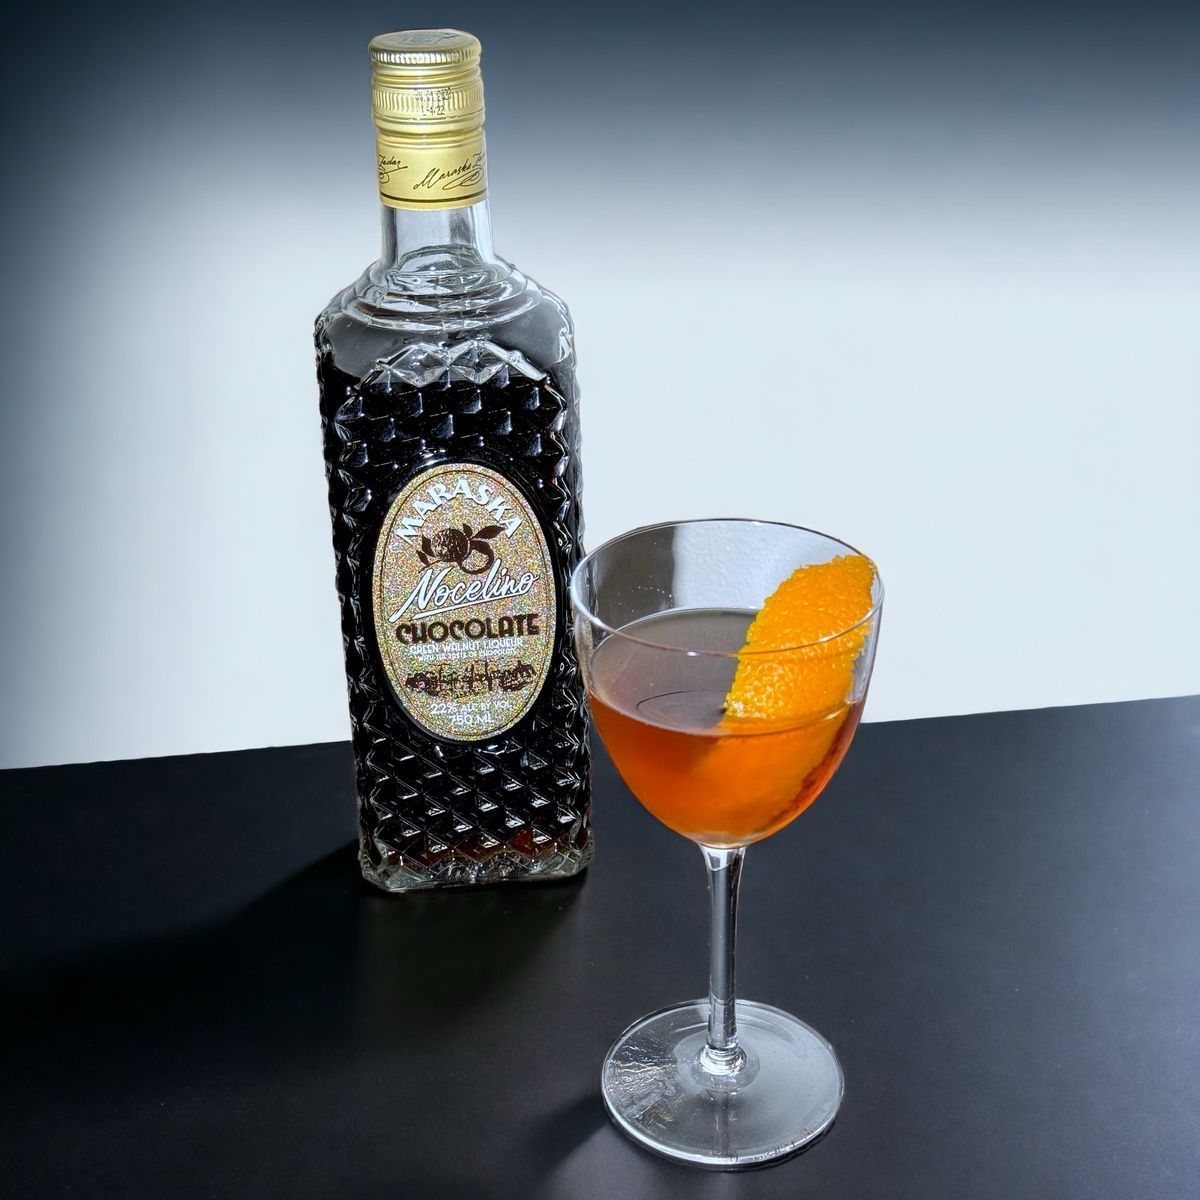 Here is something quick, easy, and spirit forward to get your weekend started. Doesn’t really taste like Mole, but the concept is there. If you want to take it to a next level, infuse the spirit with toasted sesame seeds to add the extra savory flavor. 
